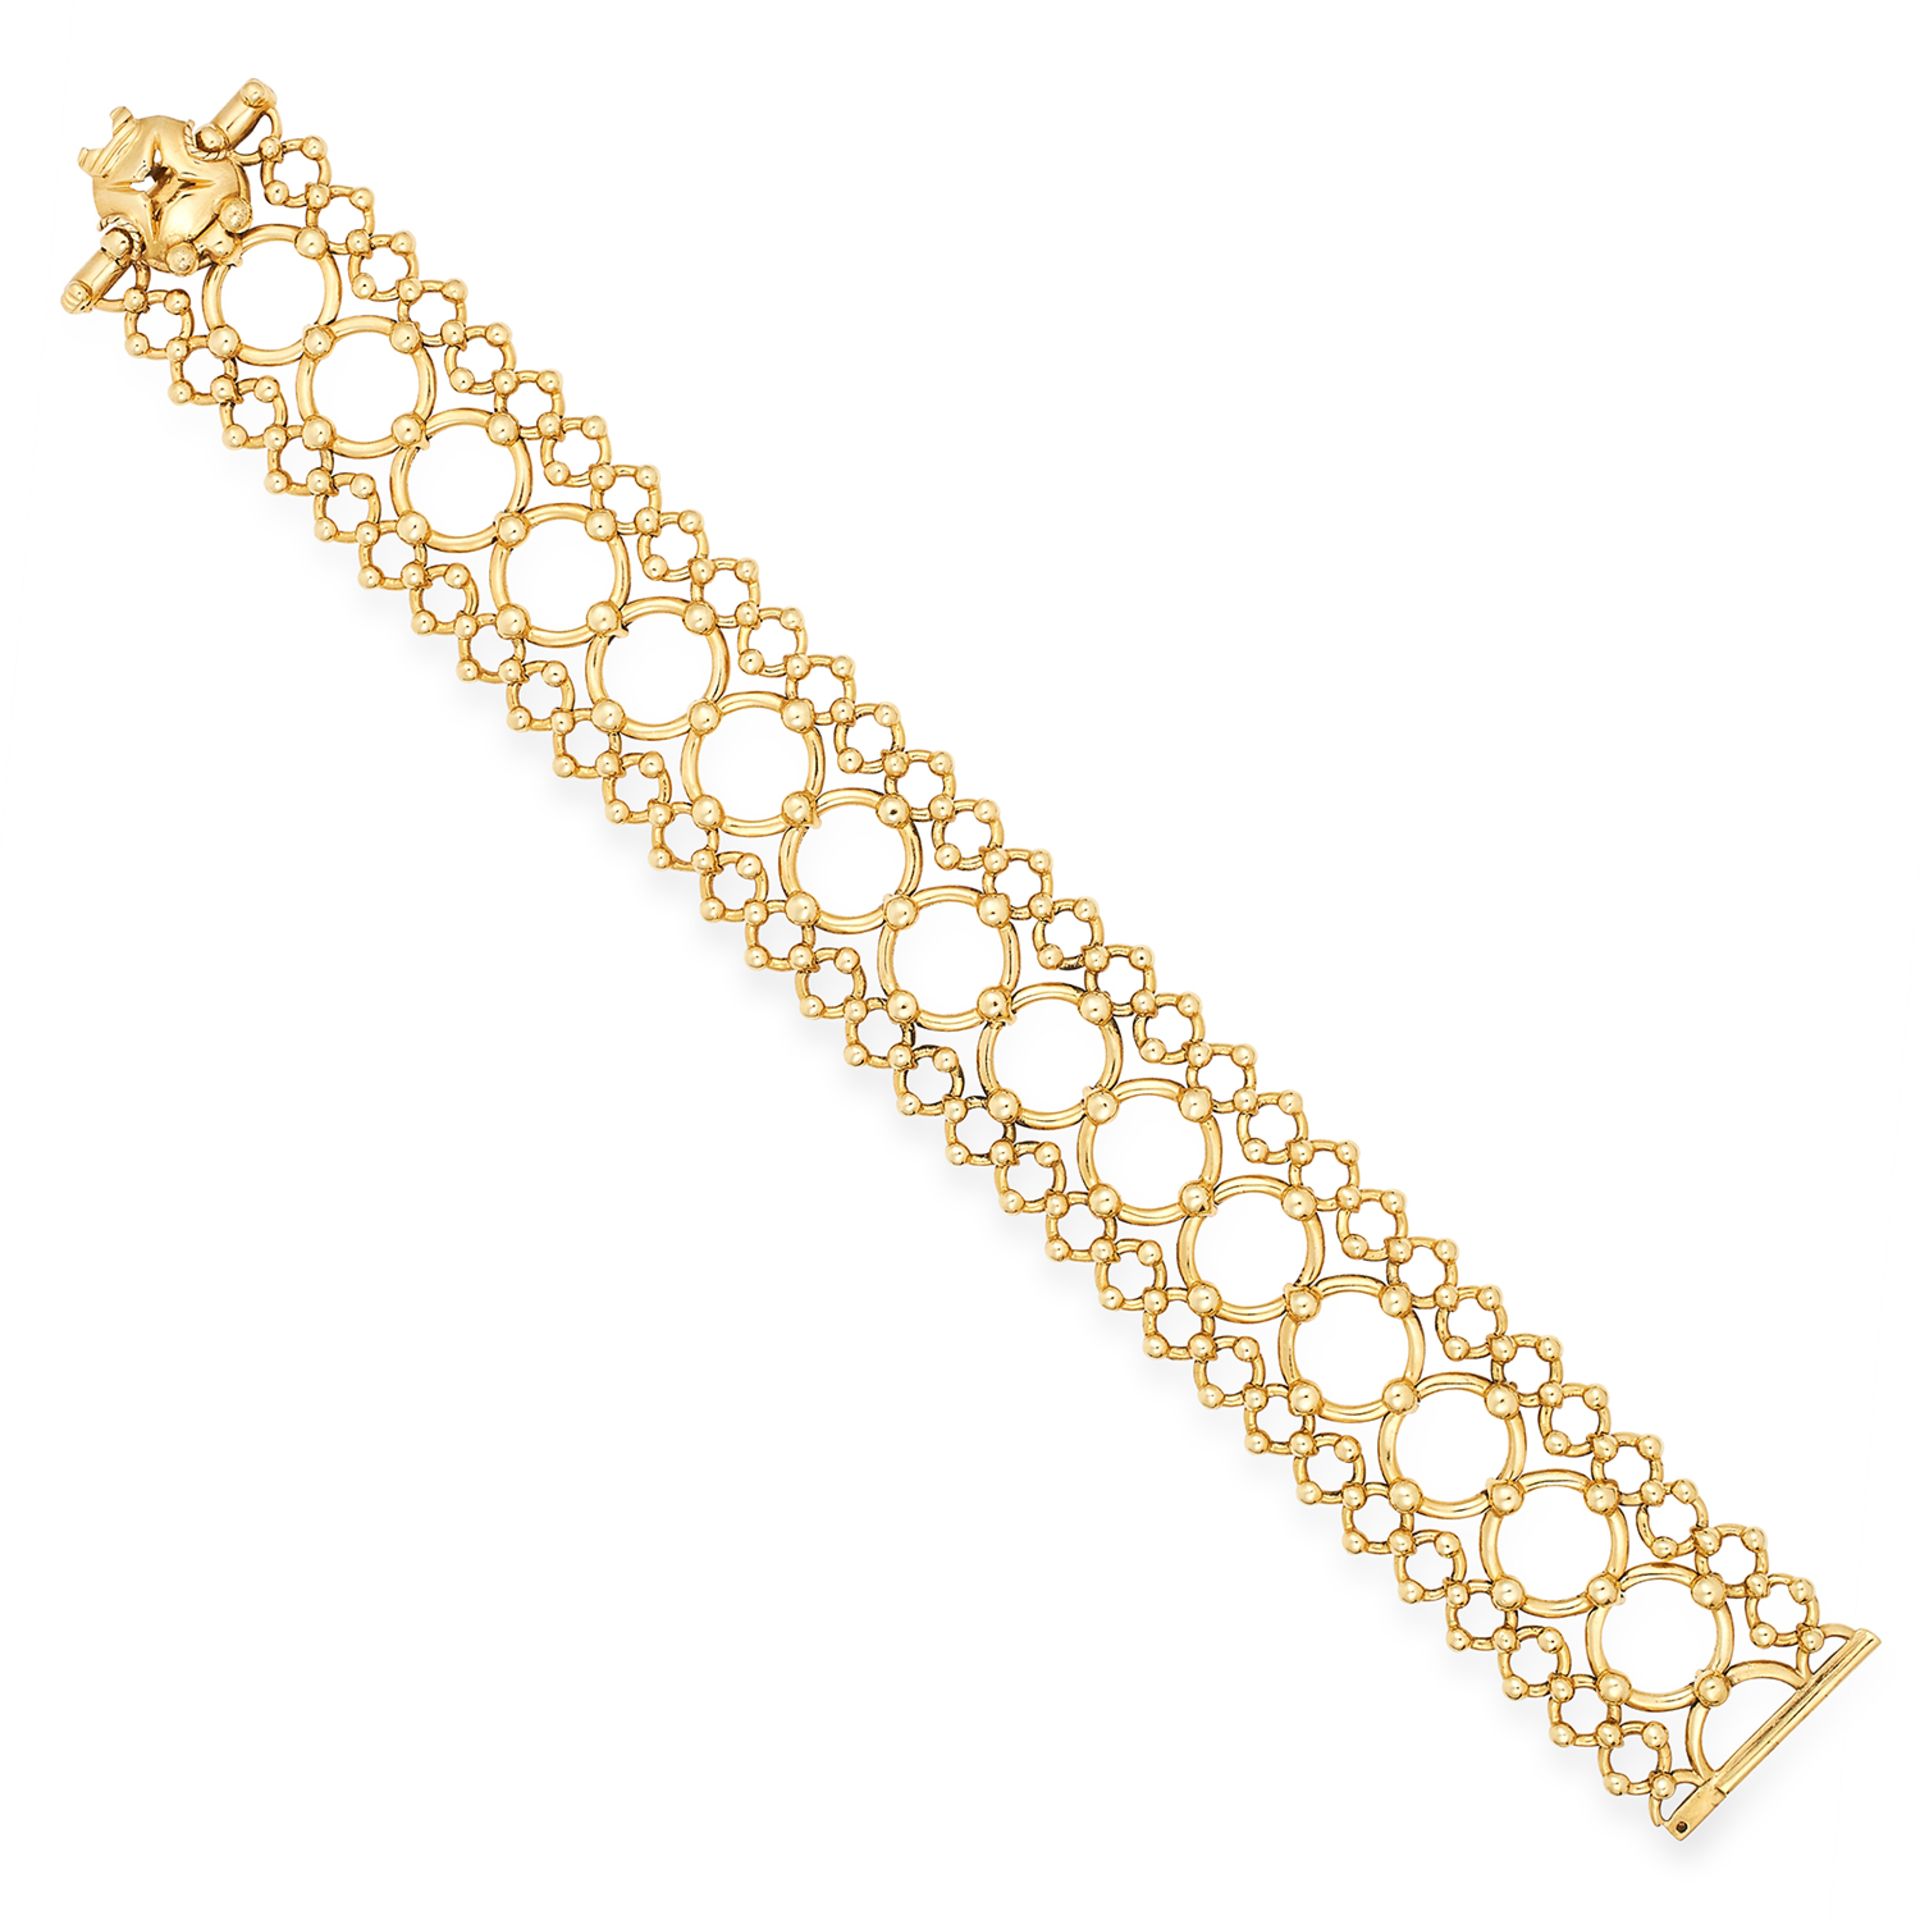 FANCY LINK GOLD BRACELET, TIFFANY & CO comprising of circular links accented by gold gold beads,